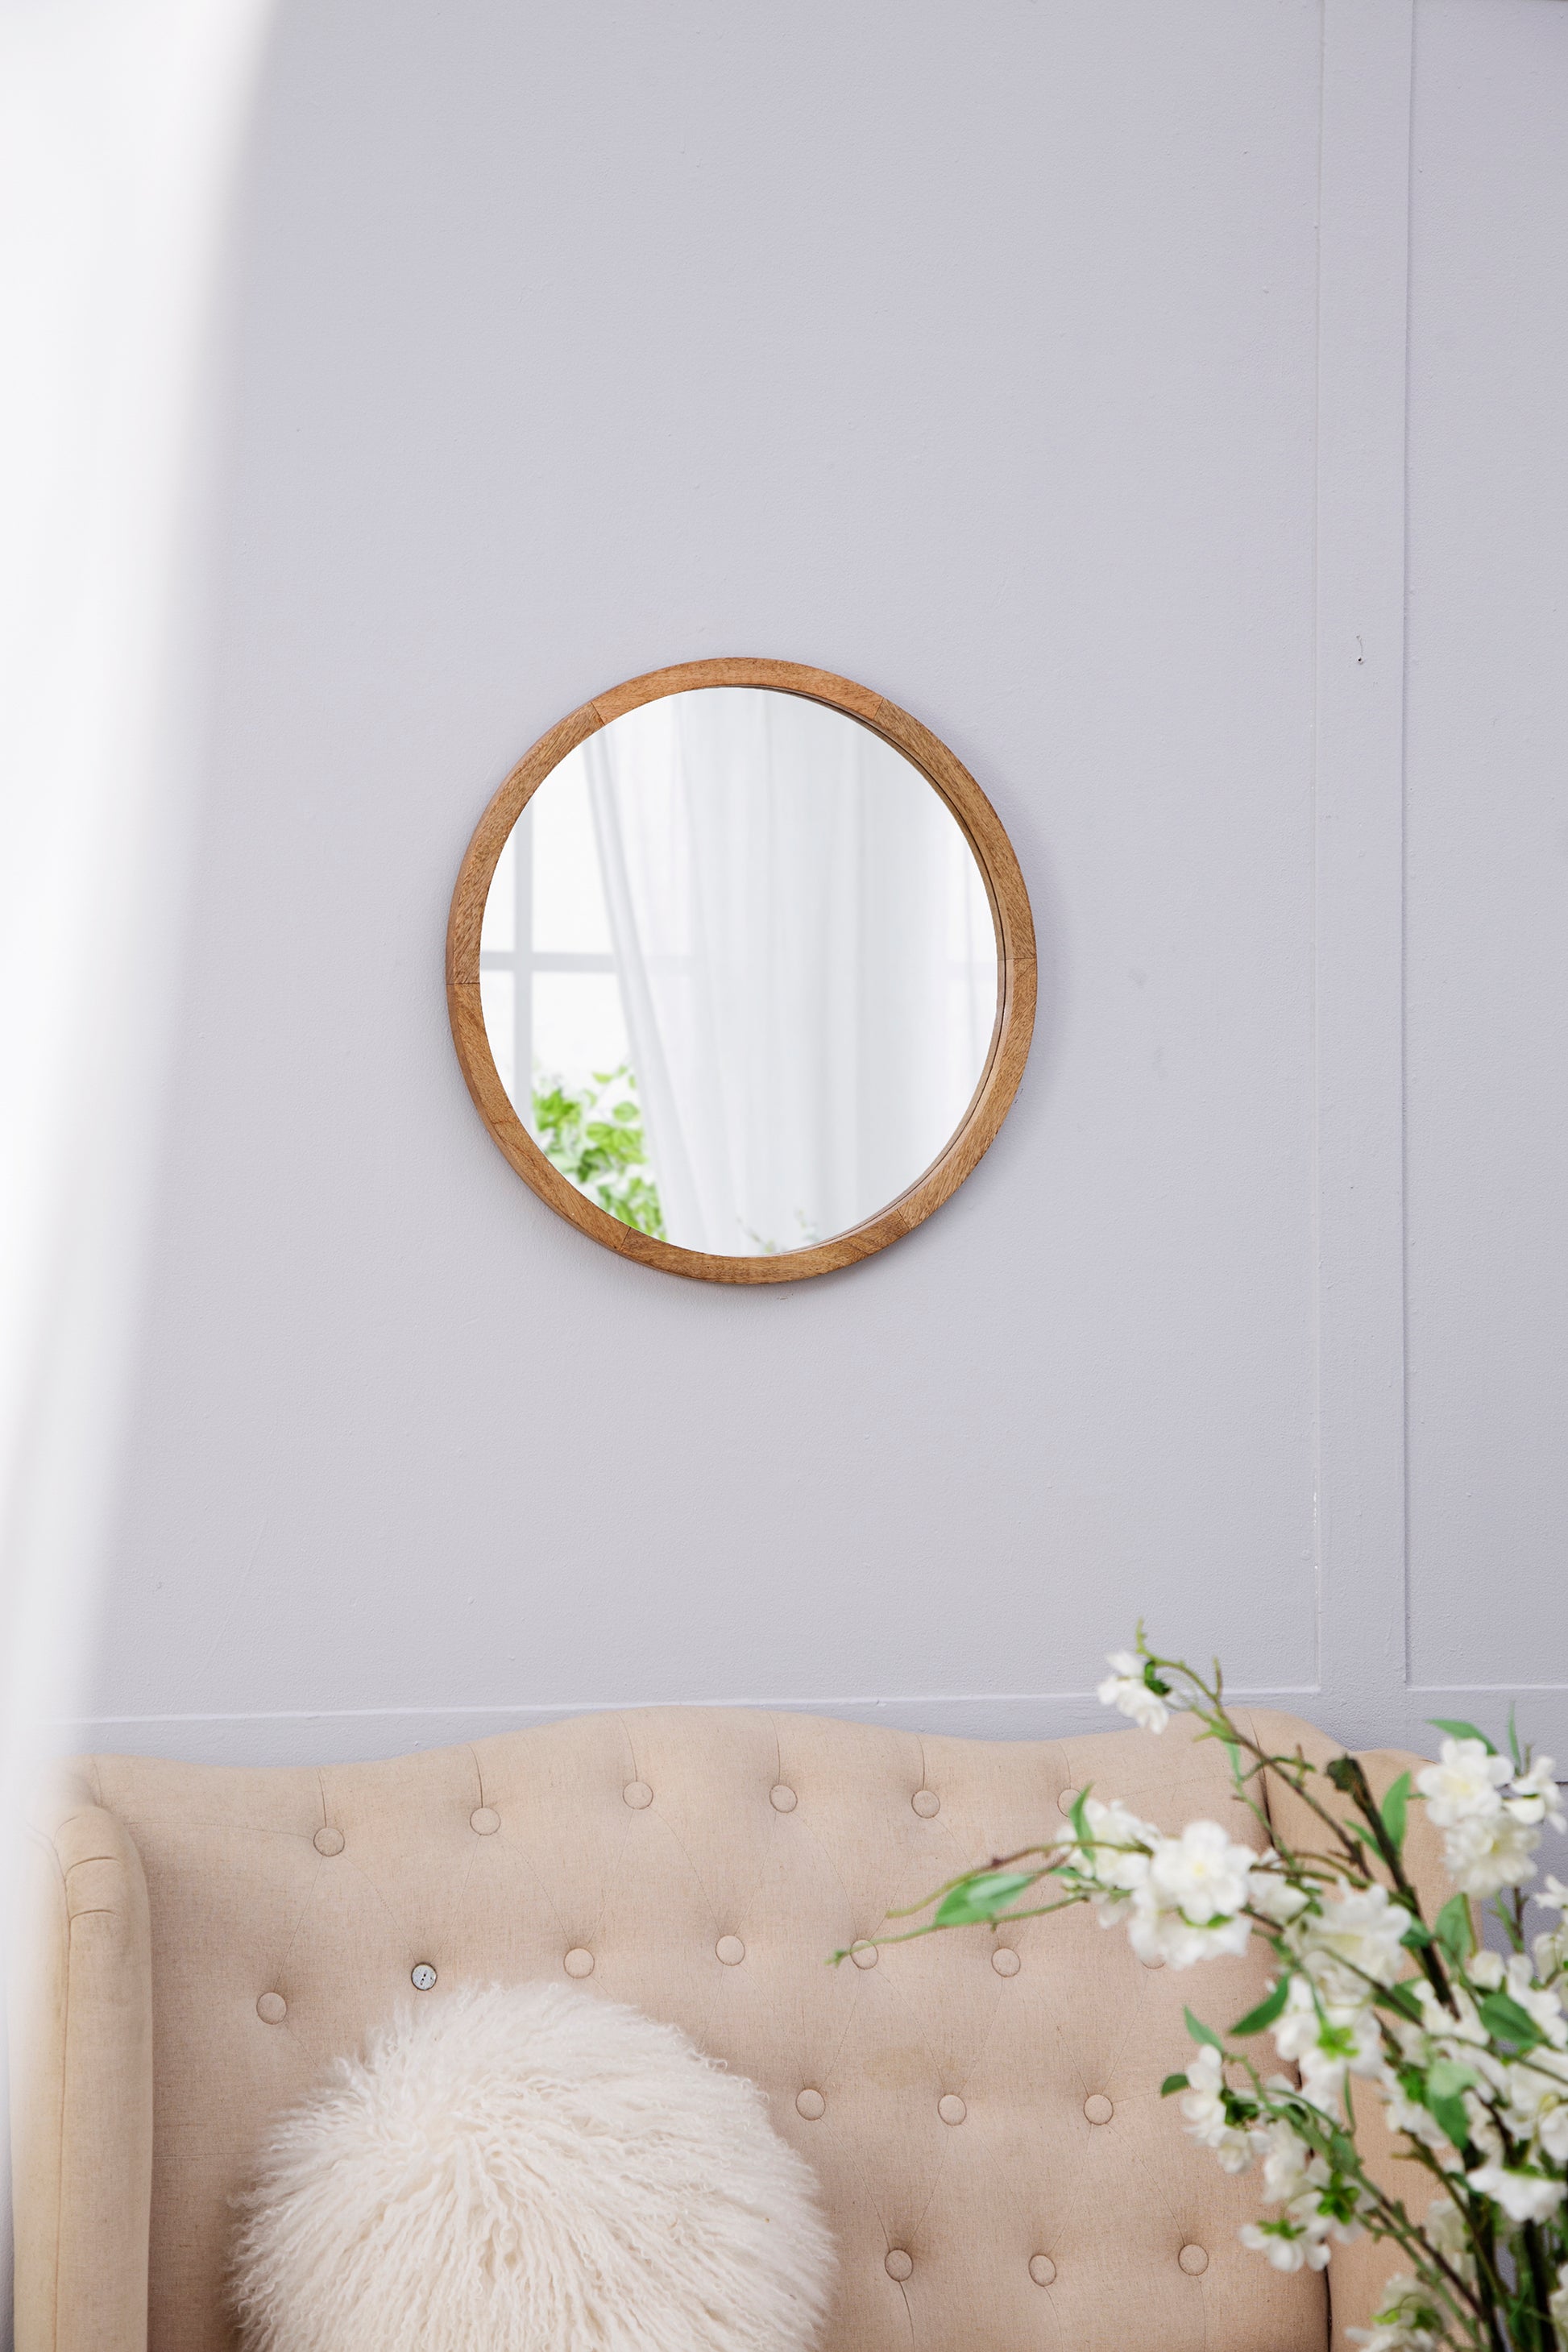 20" x 20" Circle Wall Mirror with Wooden Frame, Wall brown-wood+glass